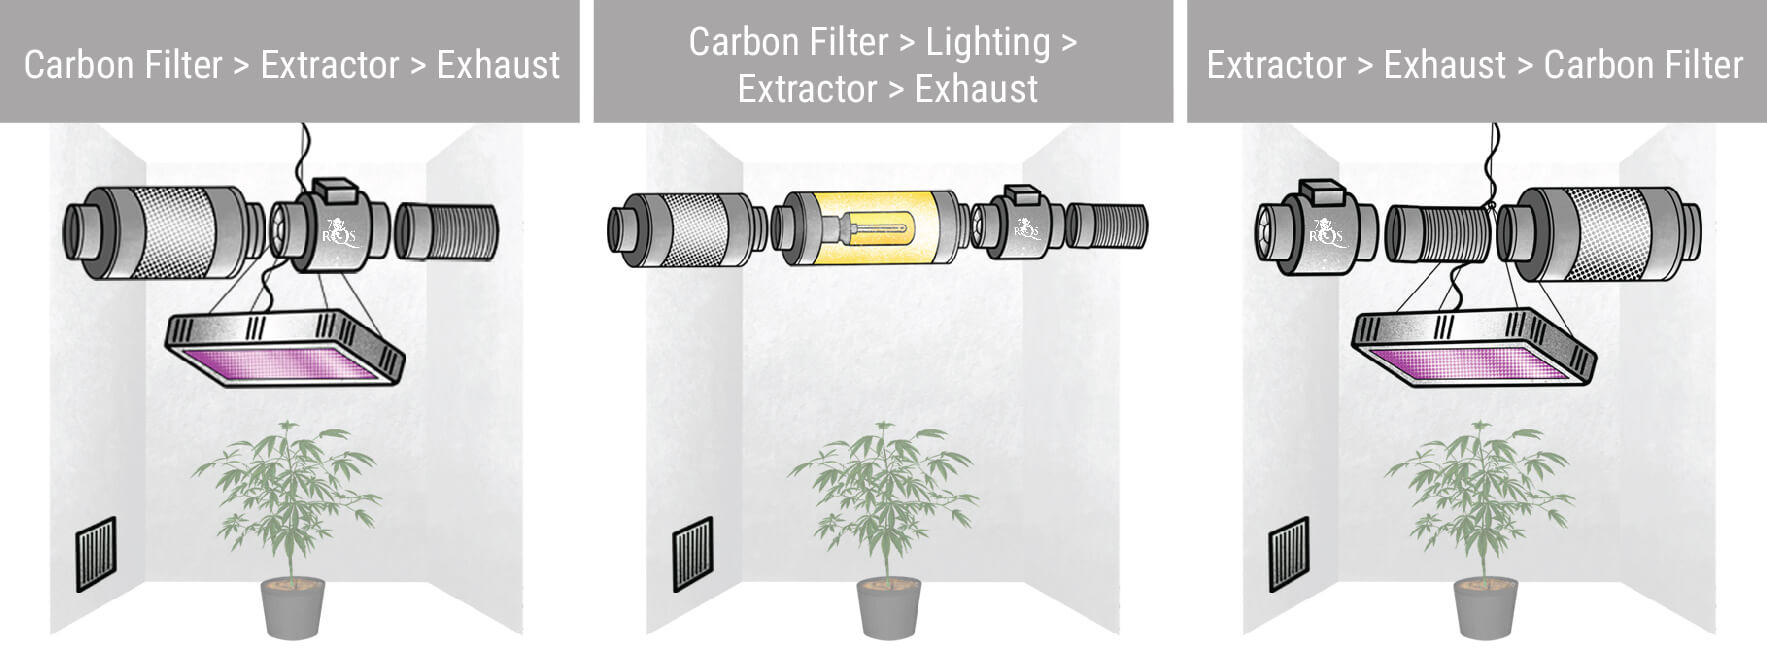 Different Extractor and Carbon Filter Configurations